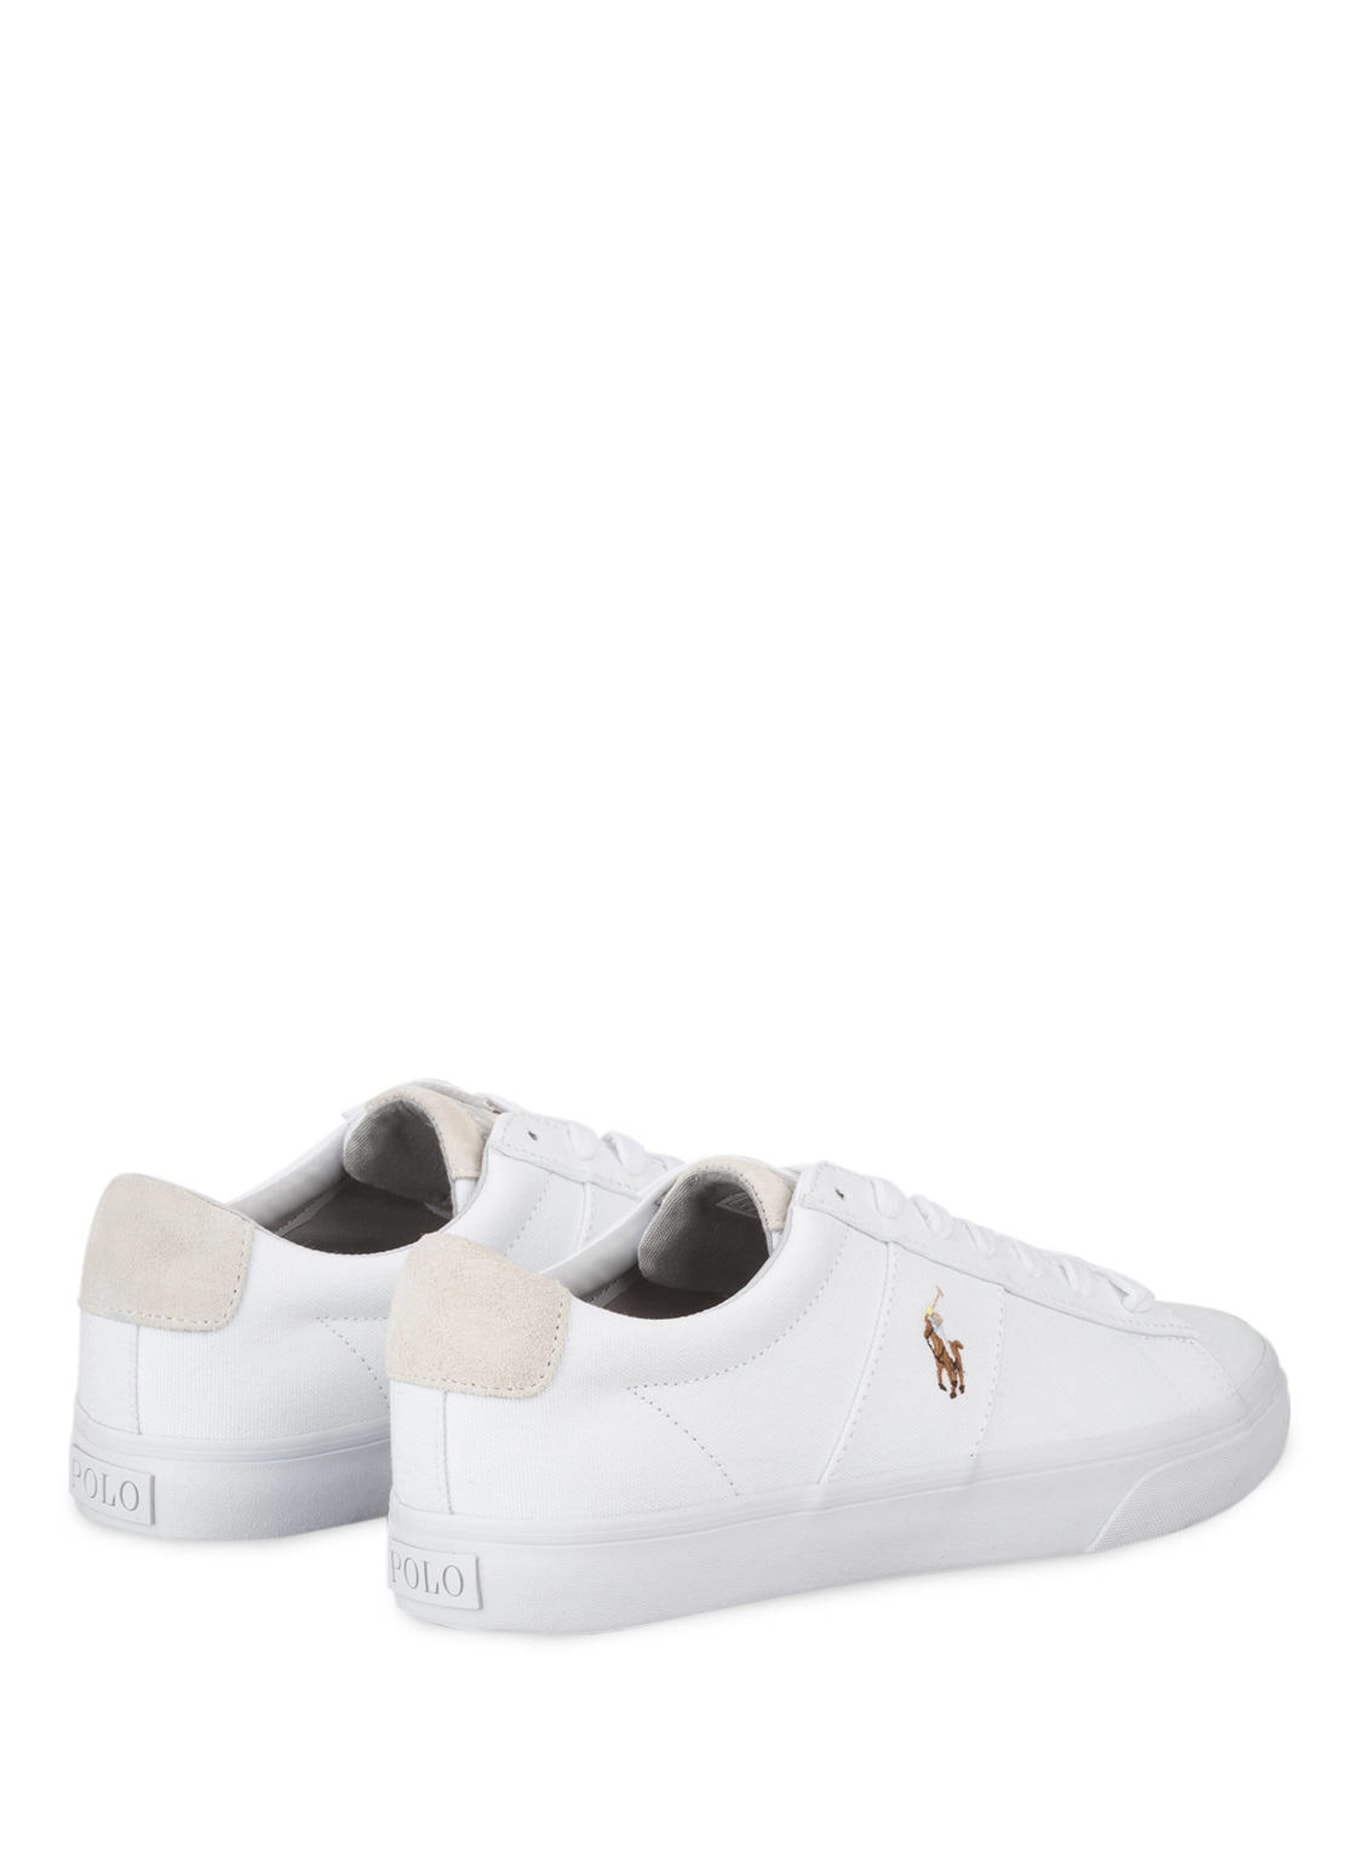 POLO RALPH LAUREN Sneakers SAYER, Color: WHITE (Image 2)